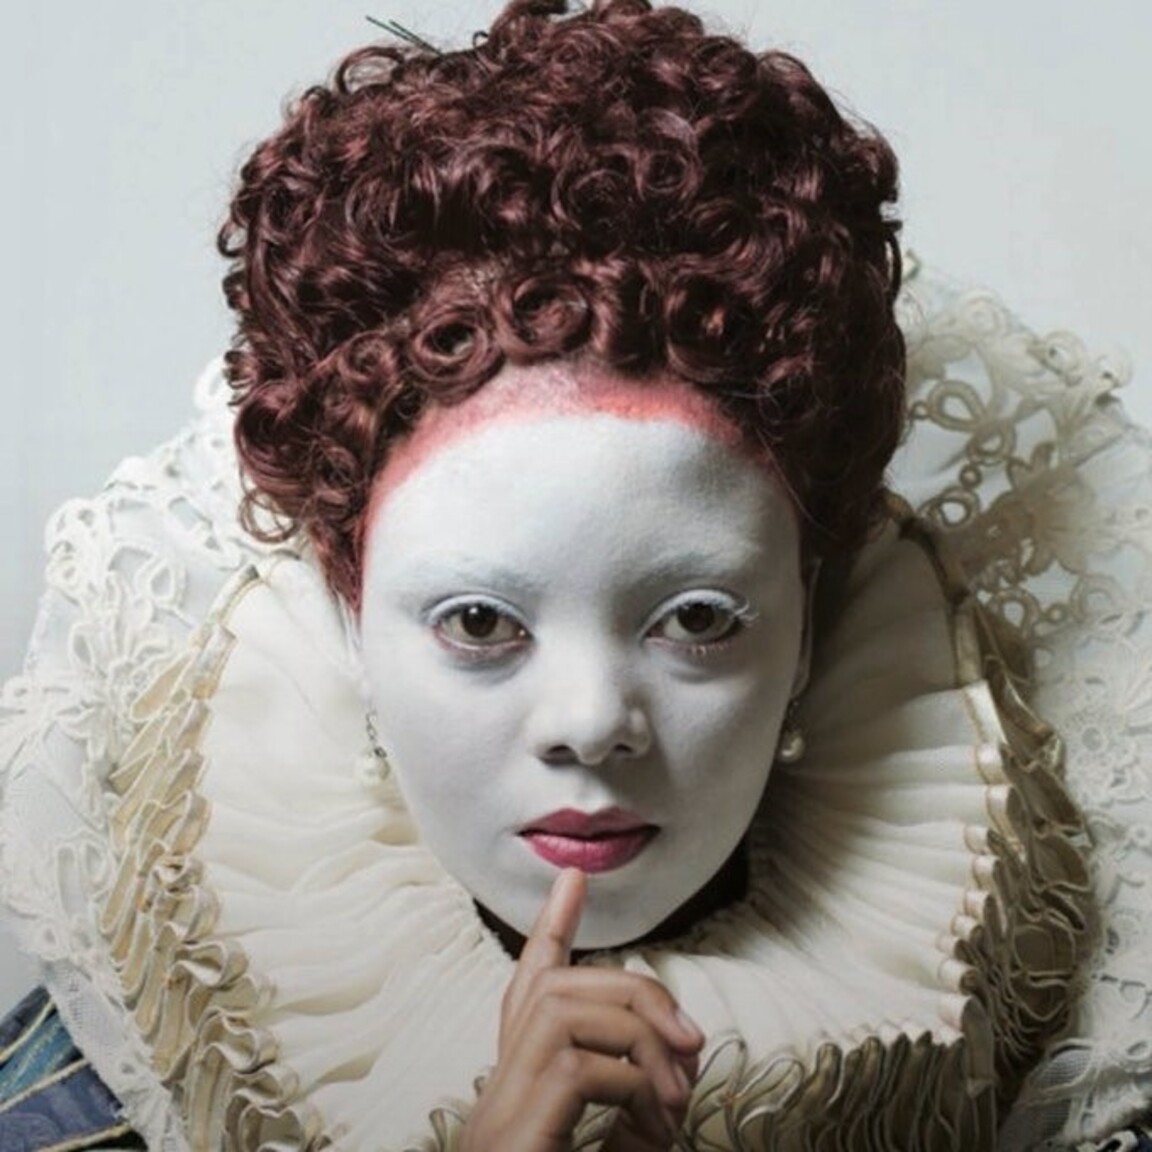 Image credit: Noluvuyiso Mpofu in costume as the title character for Donizetti’s opera Maria Stuarda for a 2015 production at the Cape Town Opera. The make-up is common for modern depictions of women in Elizabethan England, especially for royalty and those in the Tudor dynasty. (Courtesy of Cape Town Opera, photographer Bernard Bruwer)